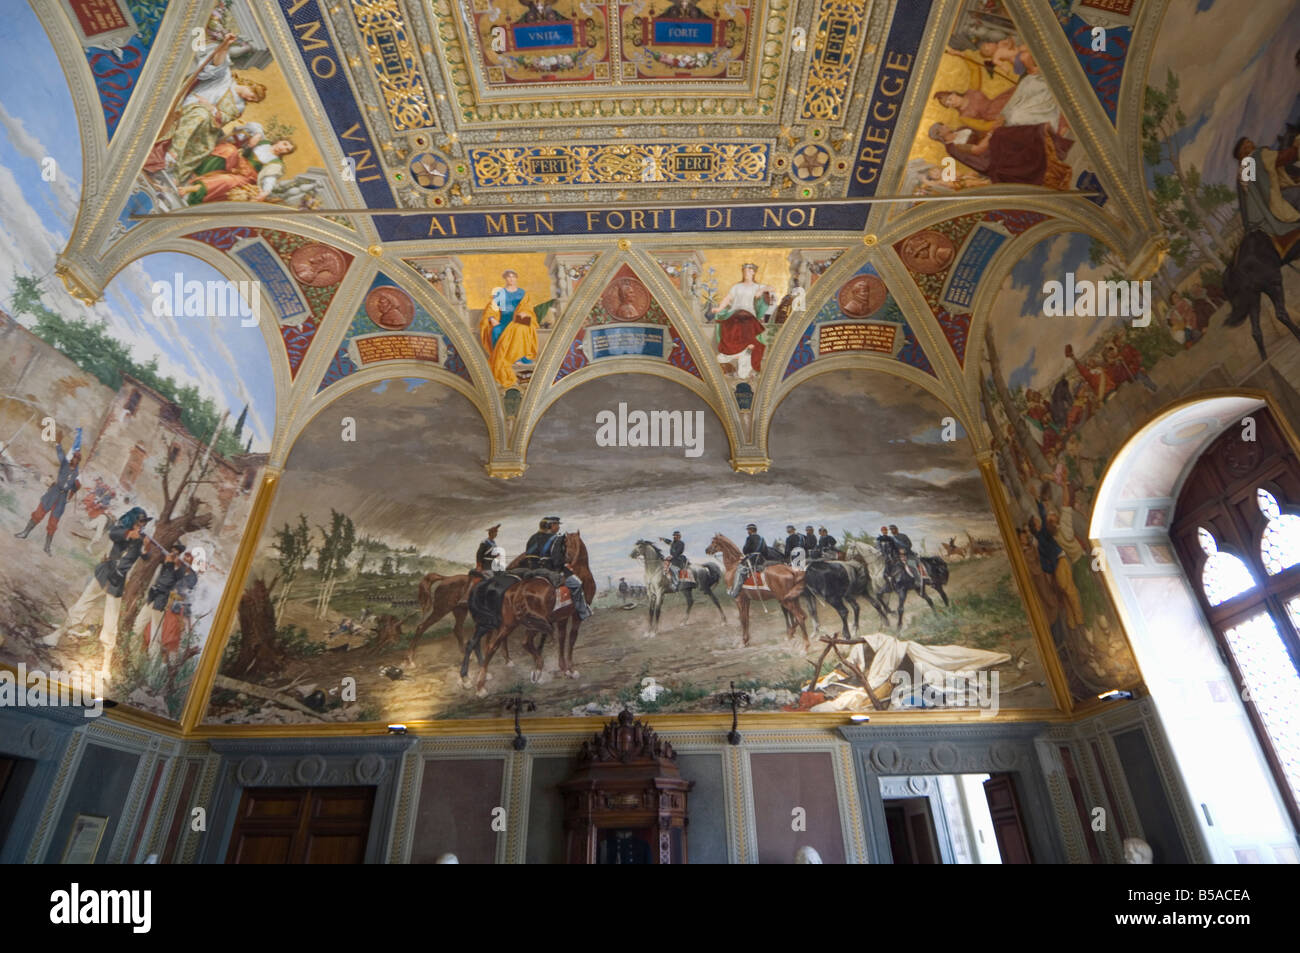 Paintings in the Palazzo Pubblico, Siena, Tuscany, Italy, Europe Stock Photo